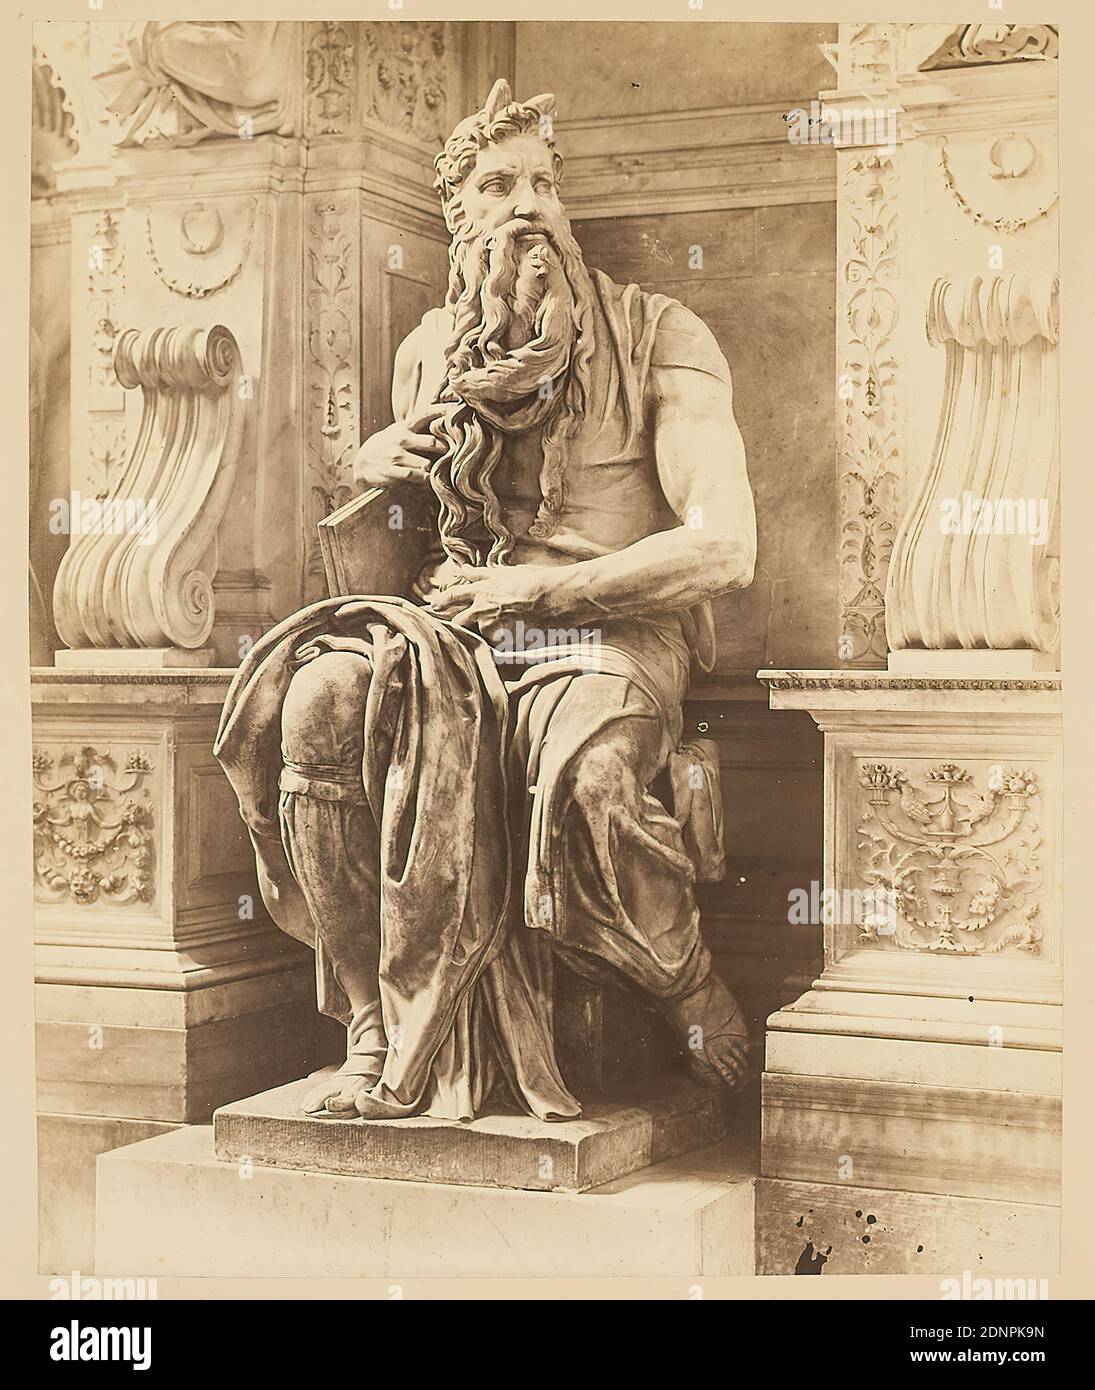 Michelangelo Buonarotti: Moses, Tomb of Pope Julius II, San Pietro in Vincoli, Rome, albumin paper, black and white positive process, image size: height: 38.80 cm; width: 31.80 cm, sculpture, plastic, sculpture art, funerary monument, interior of a church, Moses Stock Photo